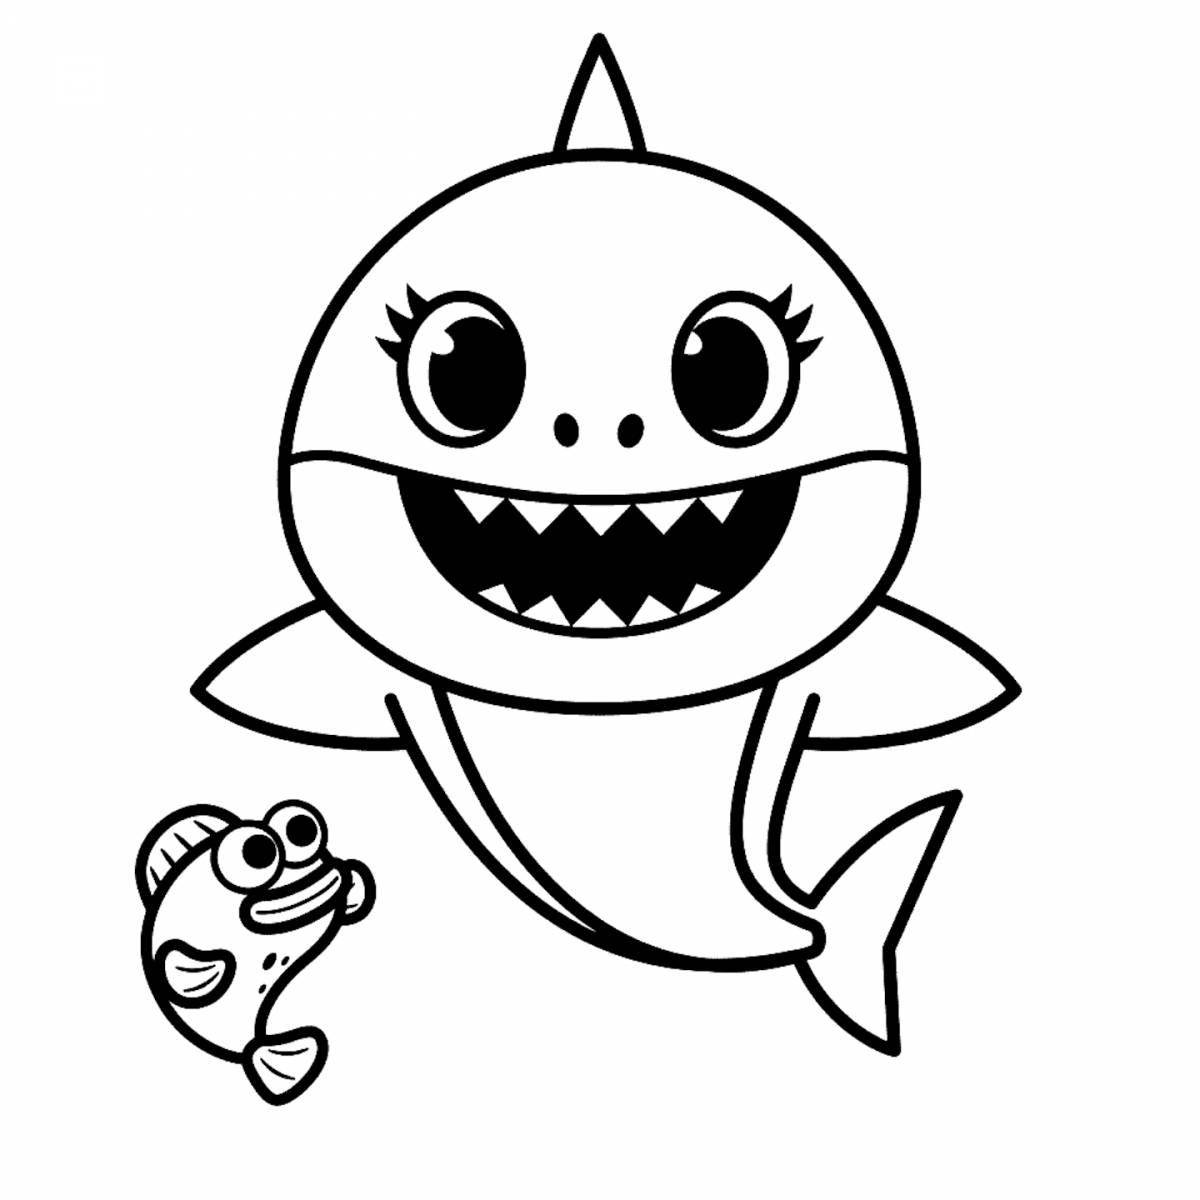 Shark funny coloring book